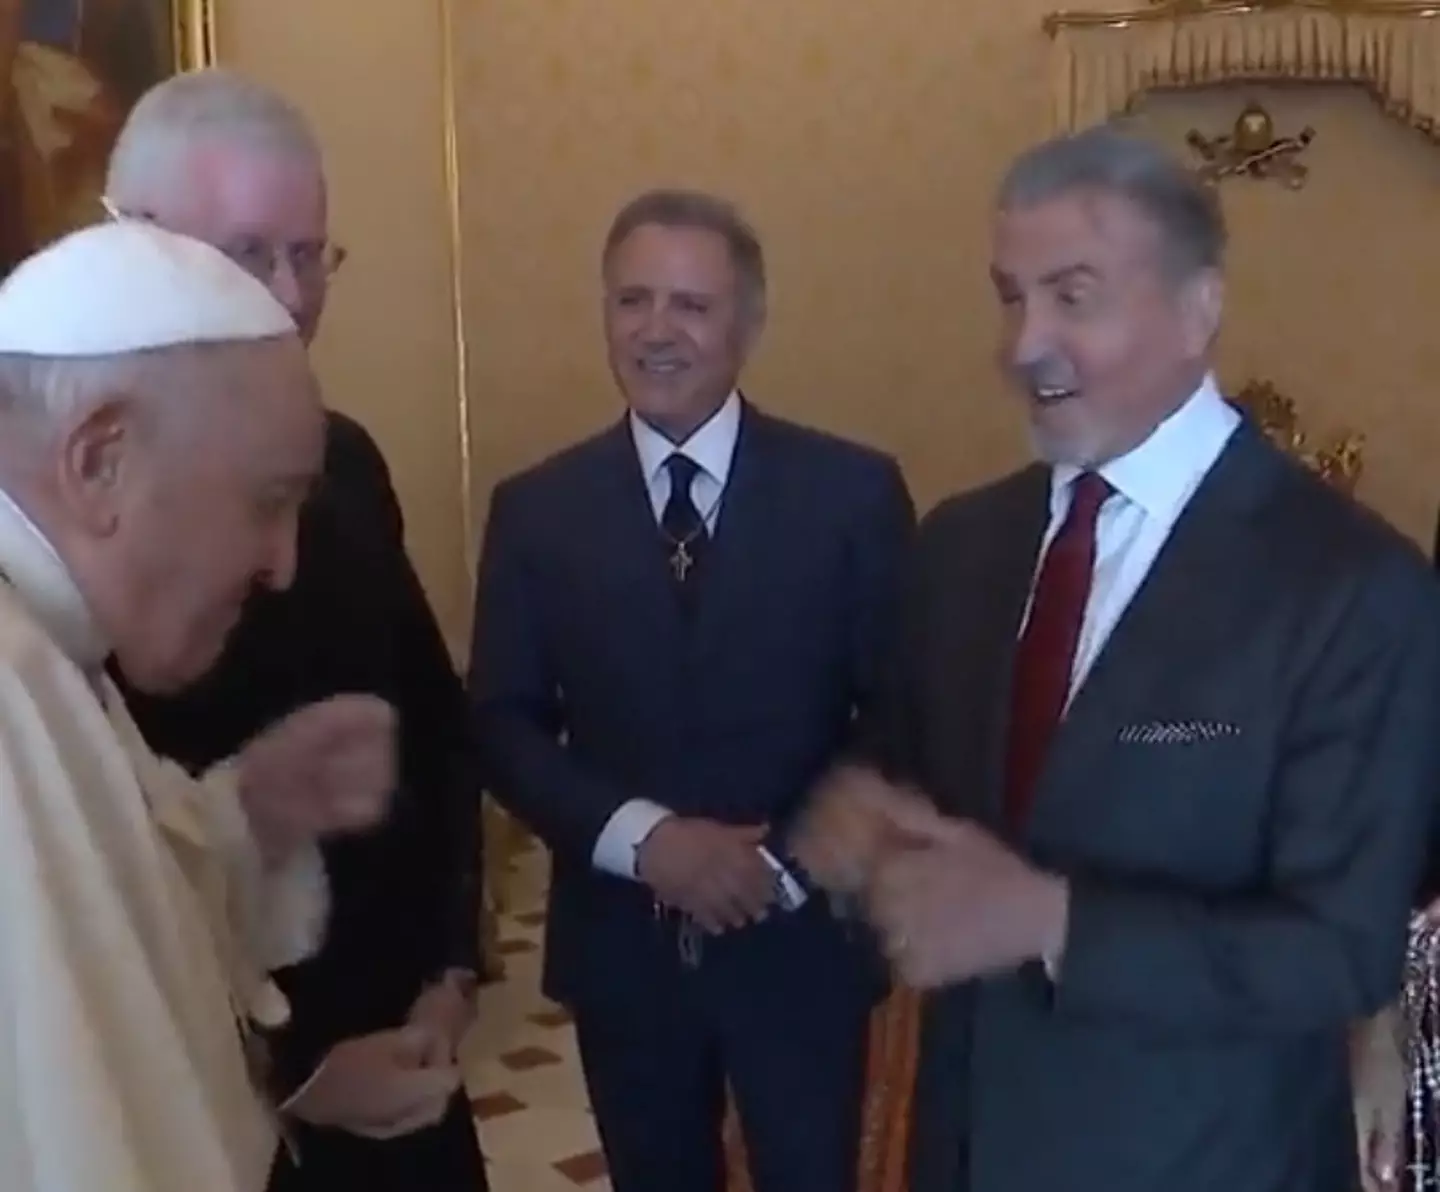 The Pope unleashed his inner Rocky Balboa after Sylvester Stallone paid him a visit this week.